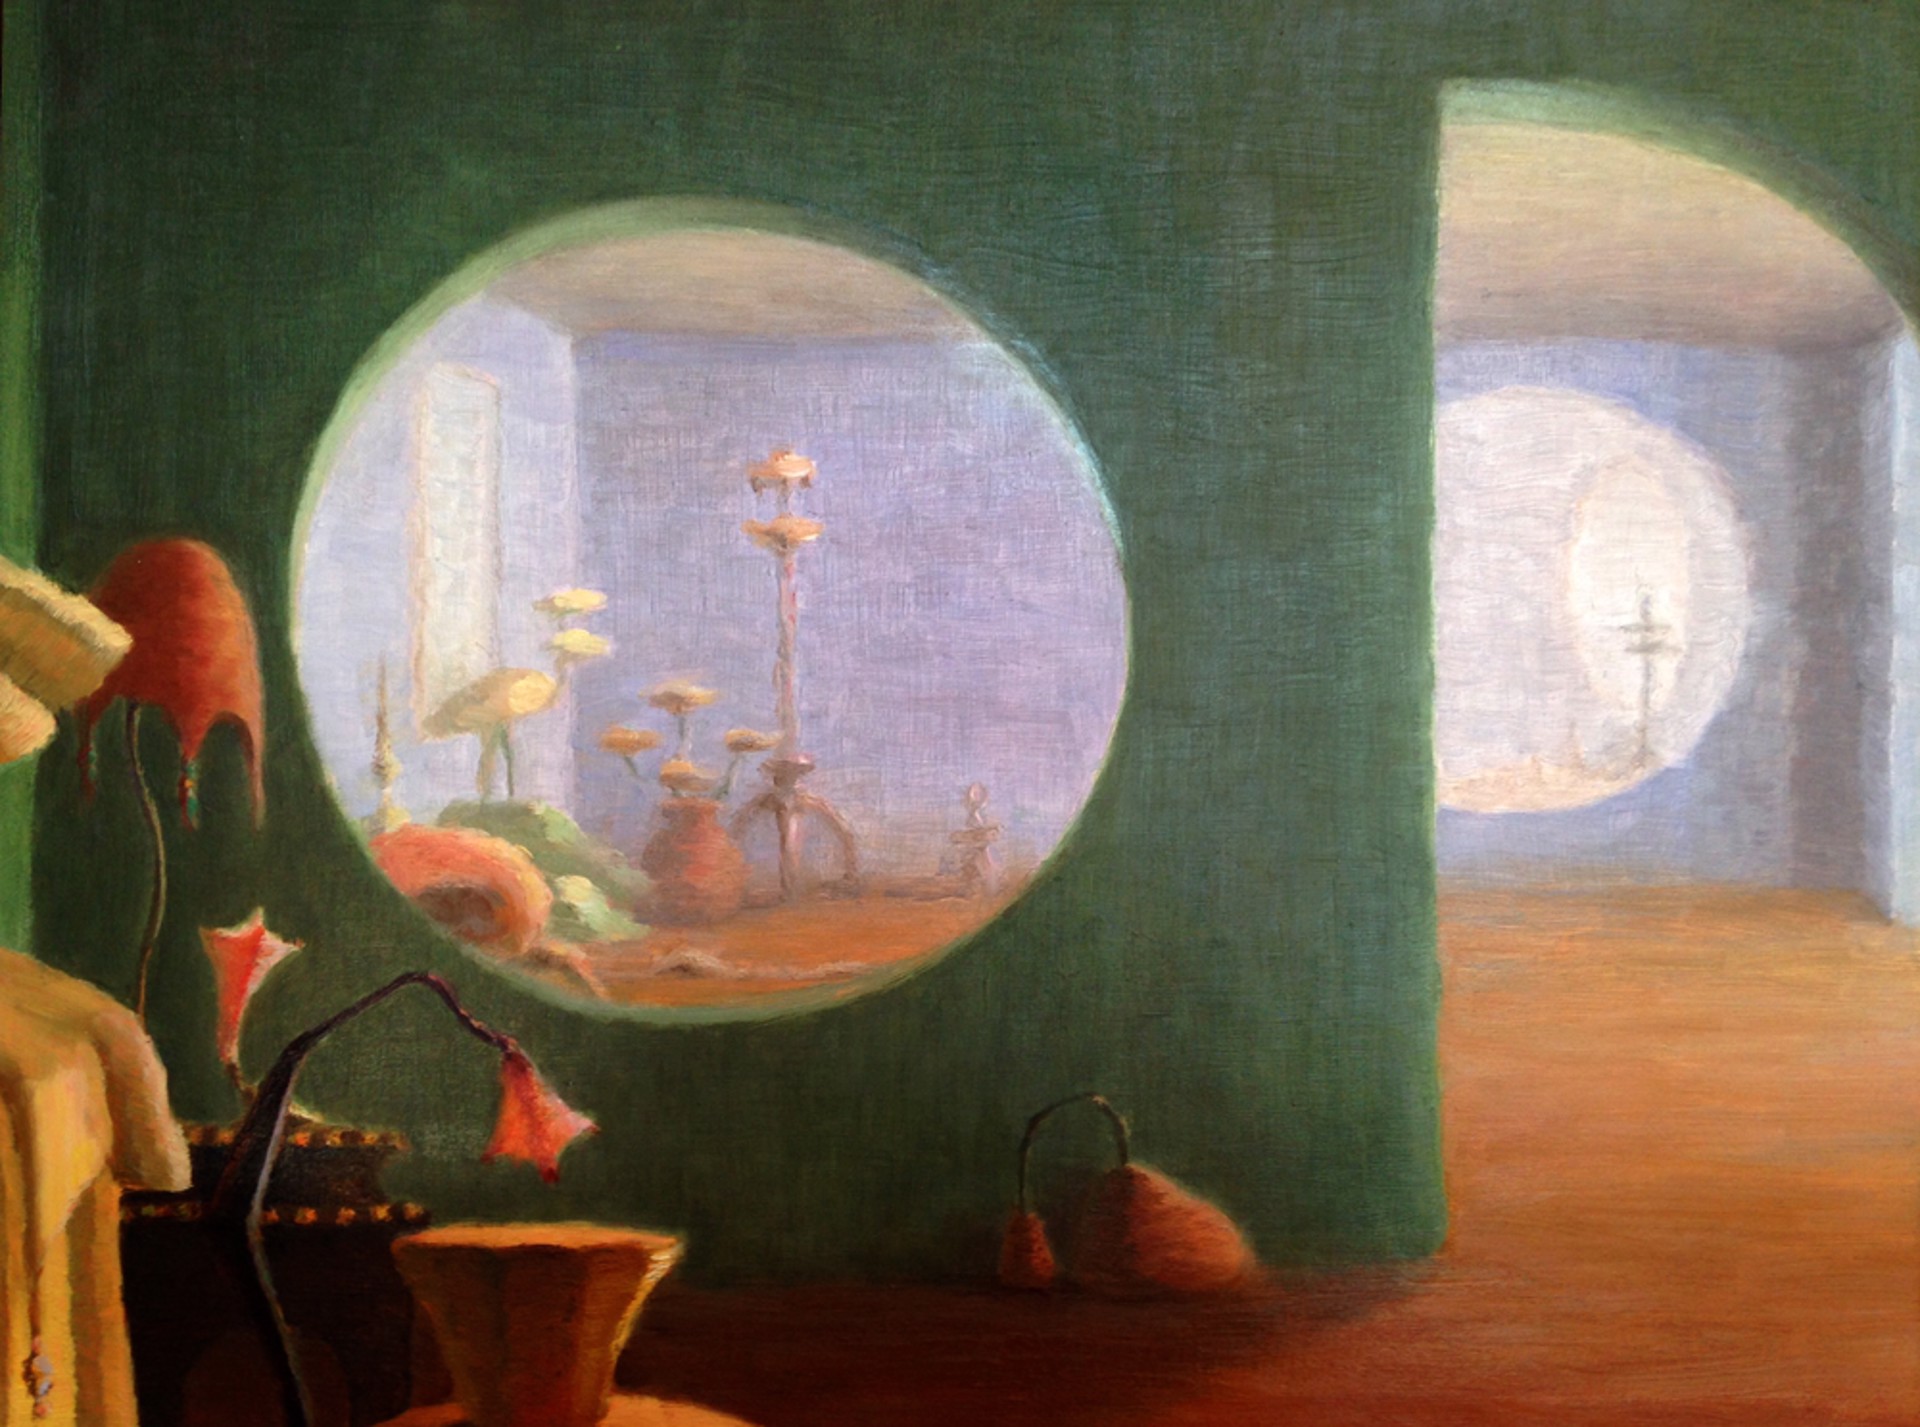 The French Musician's Apartment, Green Room by Gladys Poorte